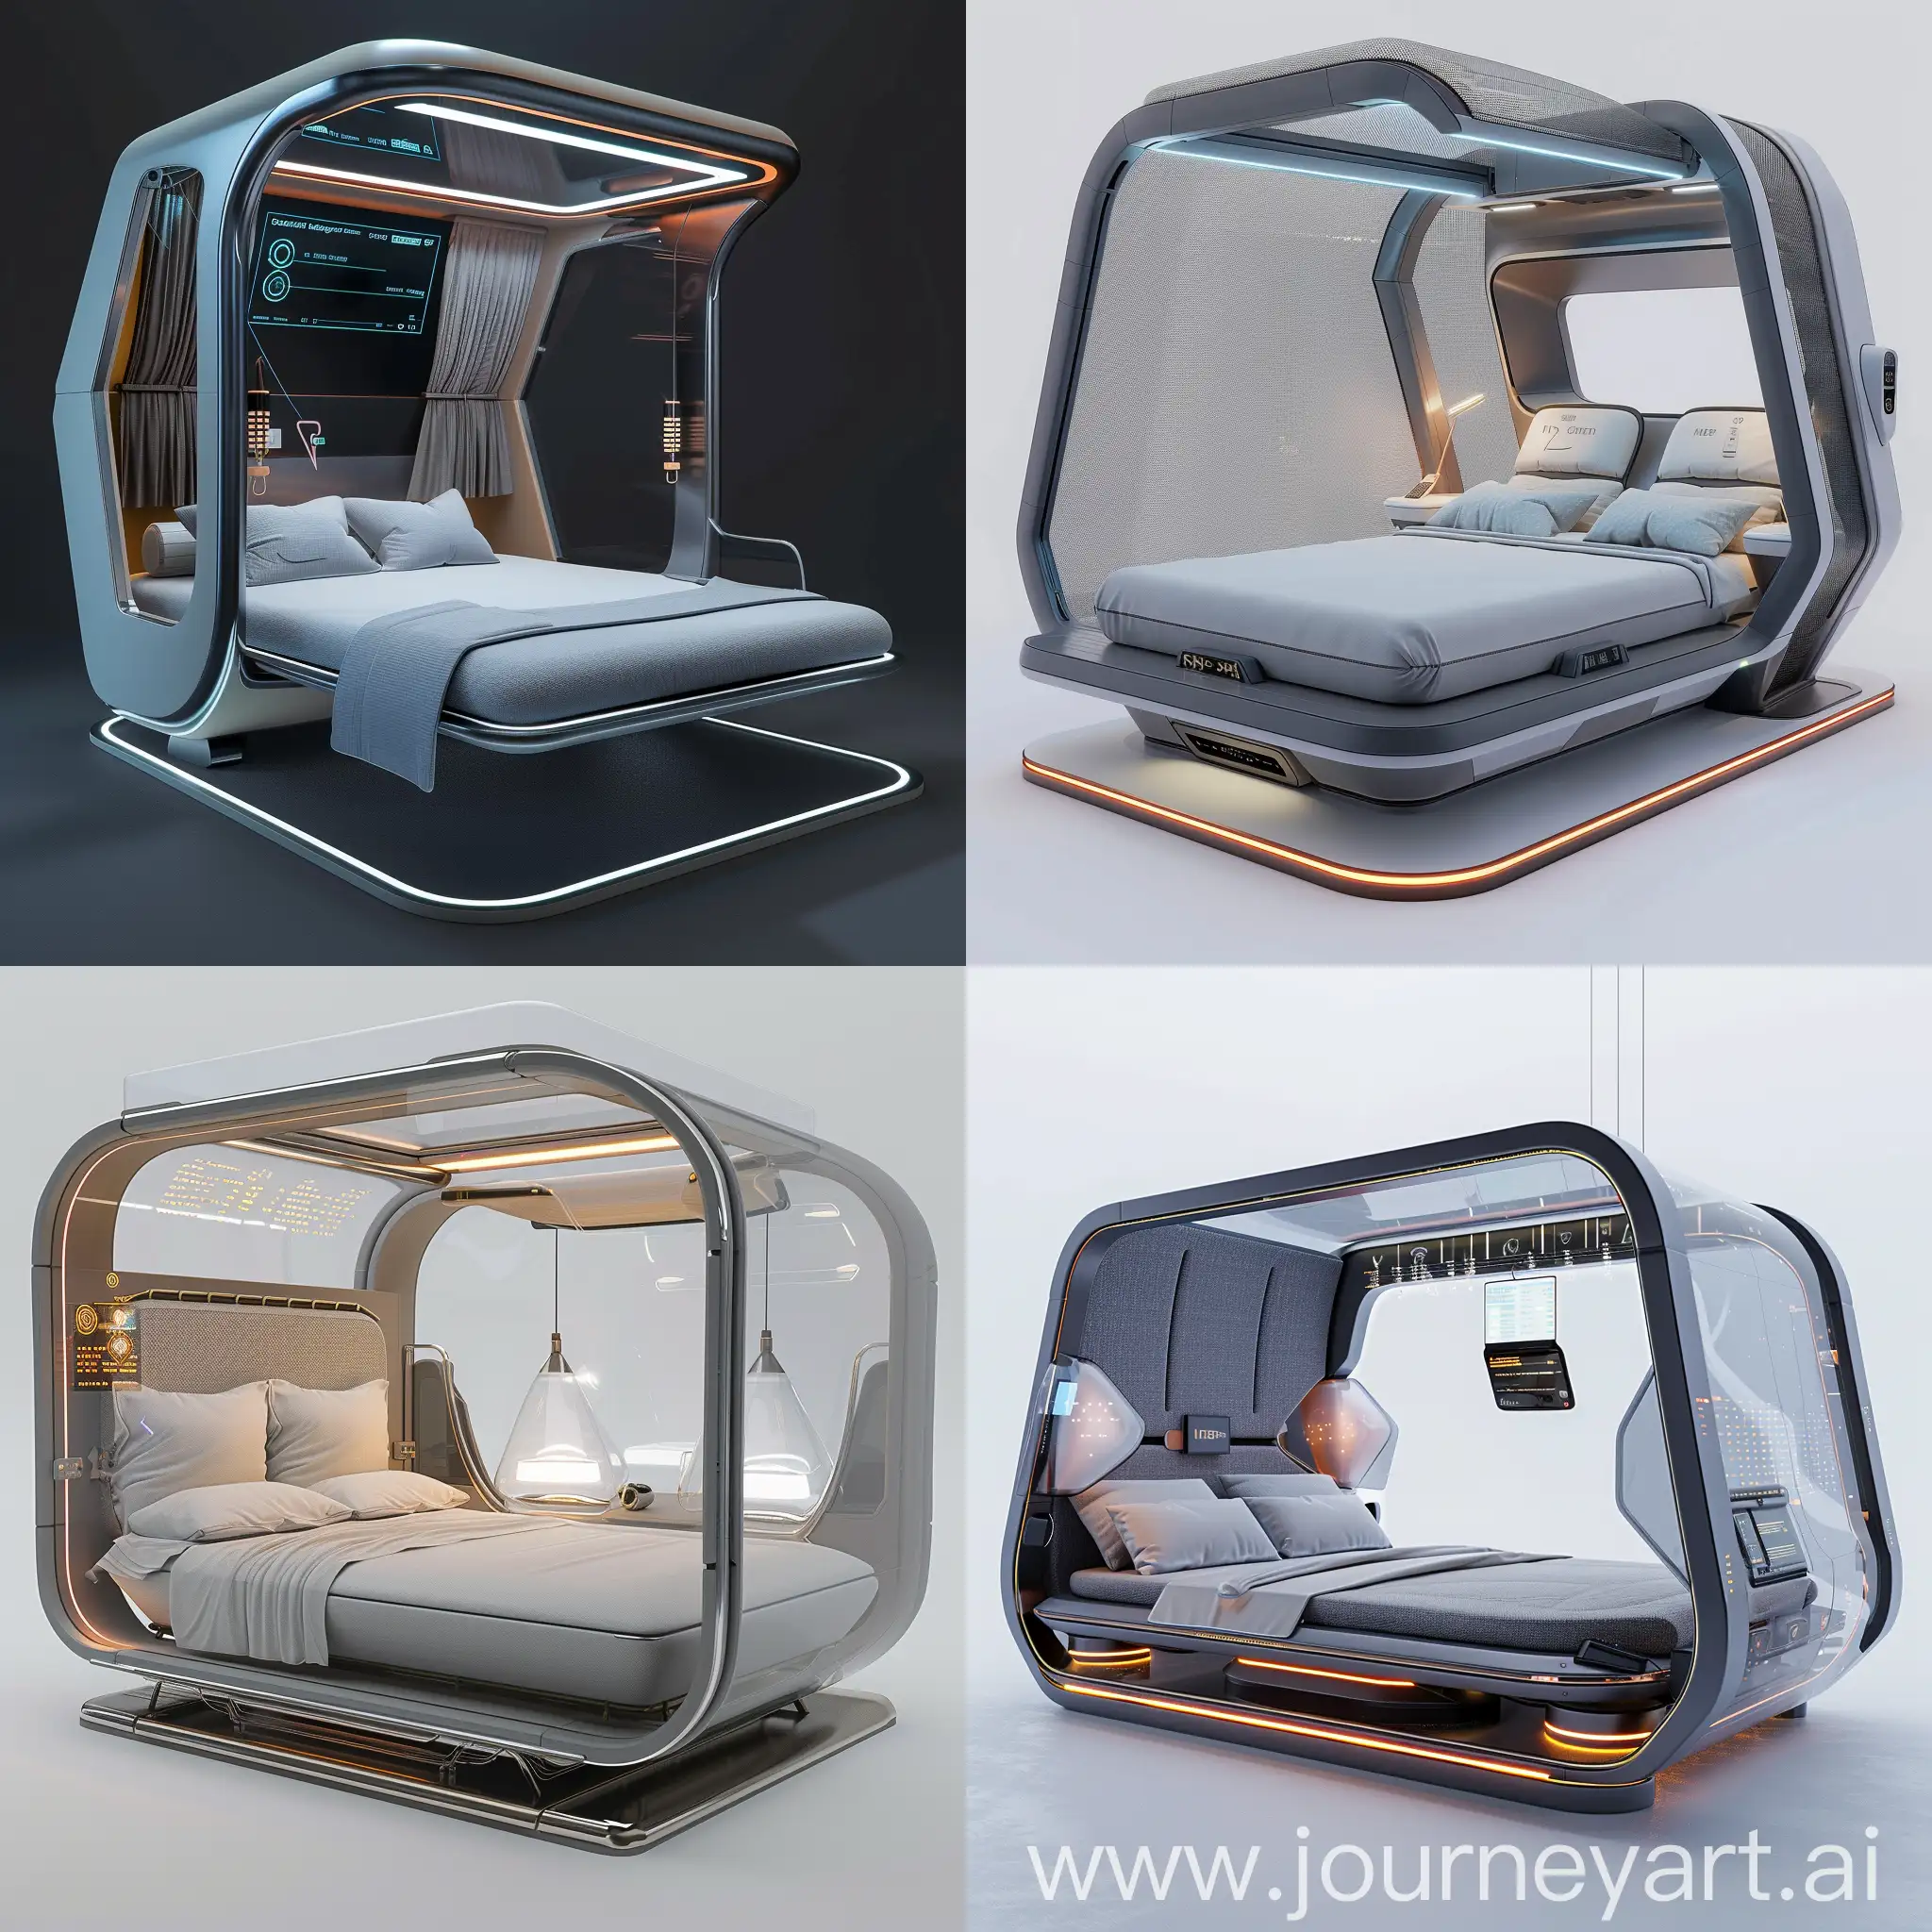 Futuristic-Bed-with-Biometric-Sensors-and-Smart-Fabric-Technology